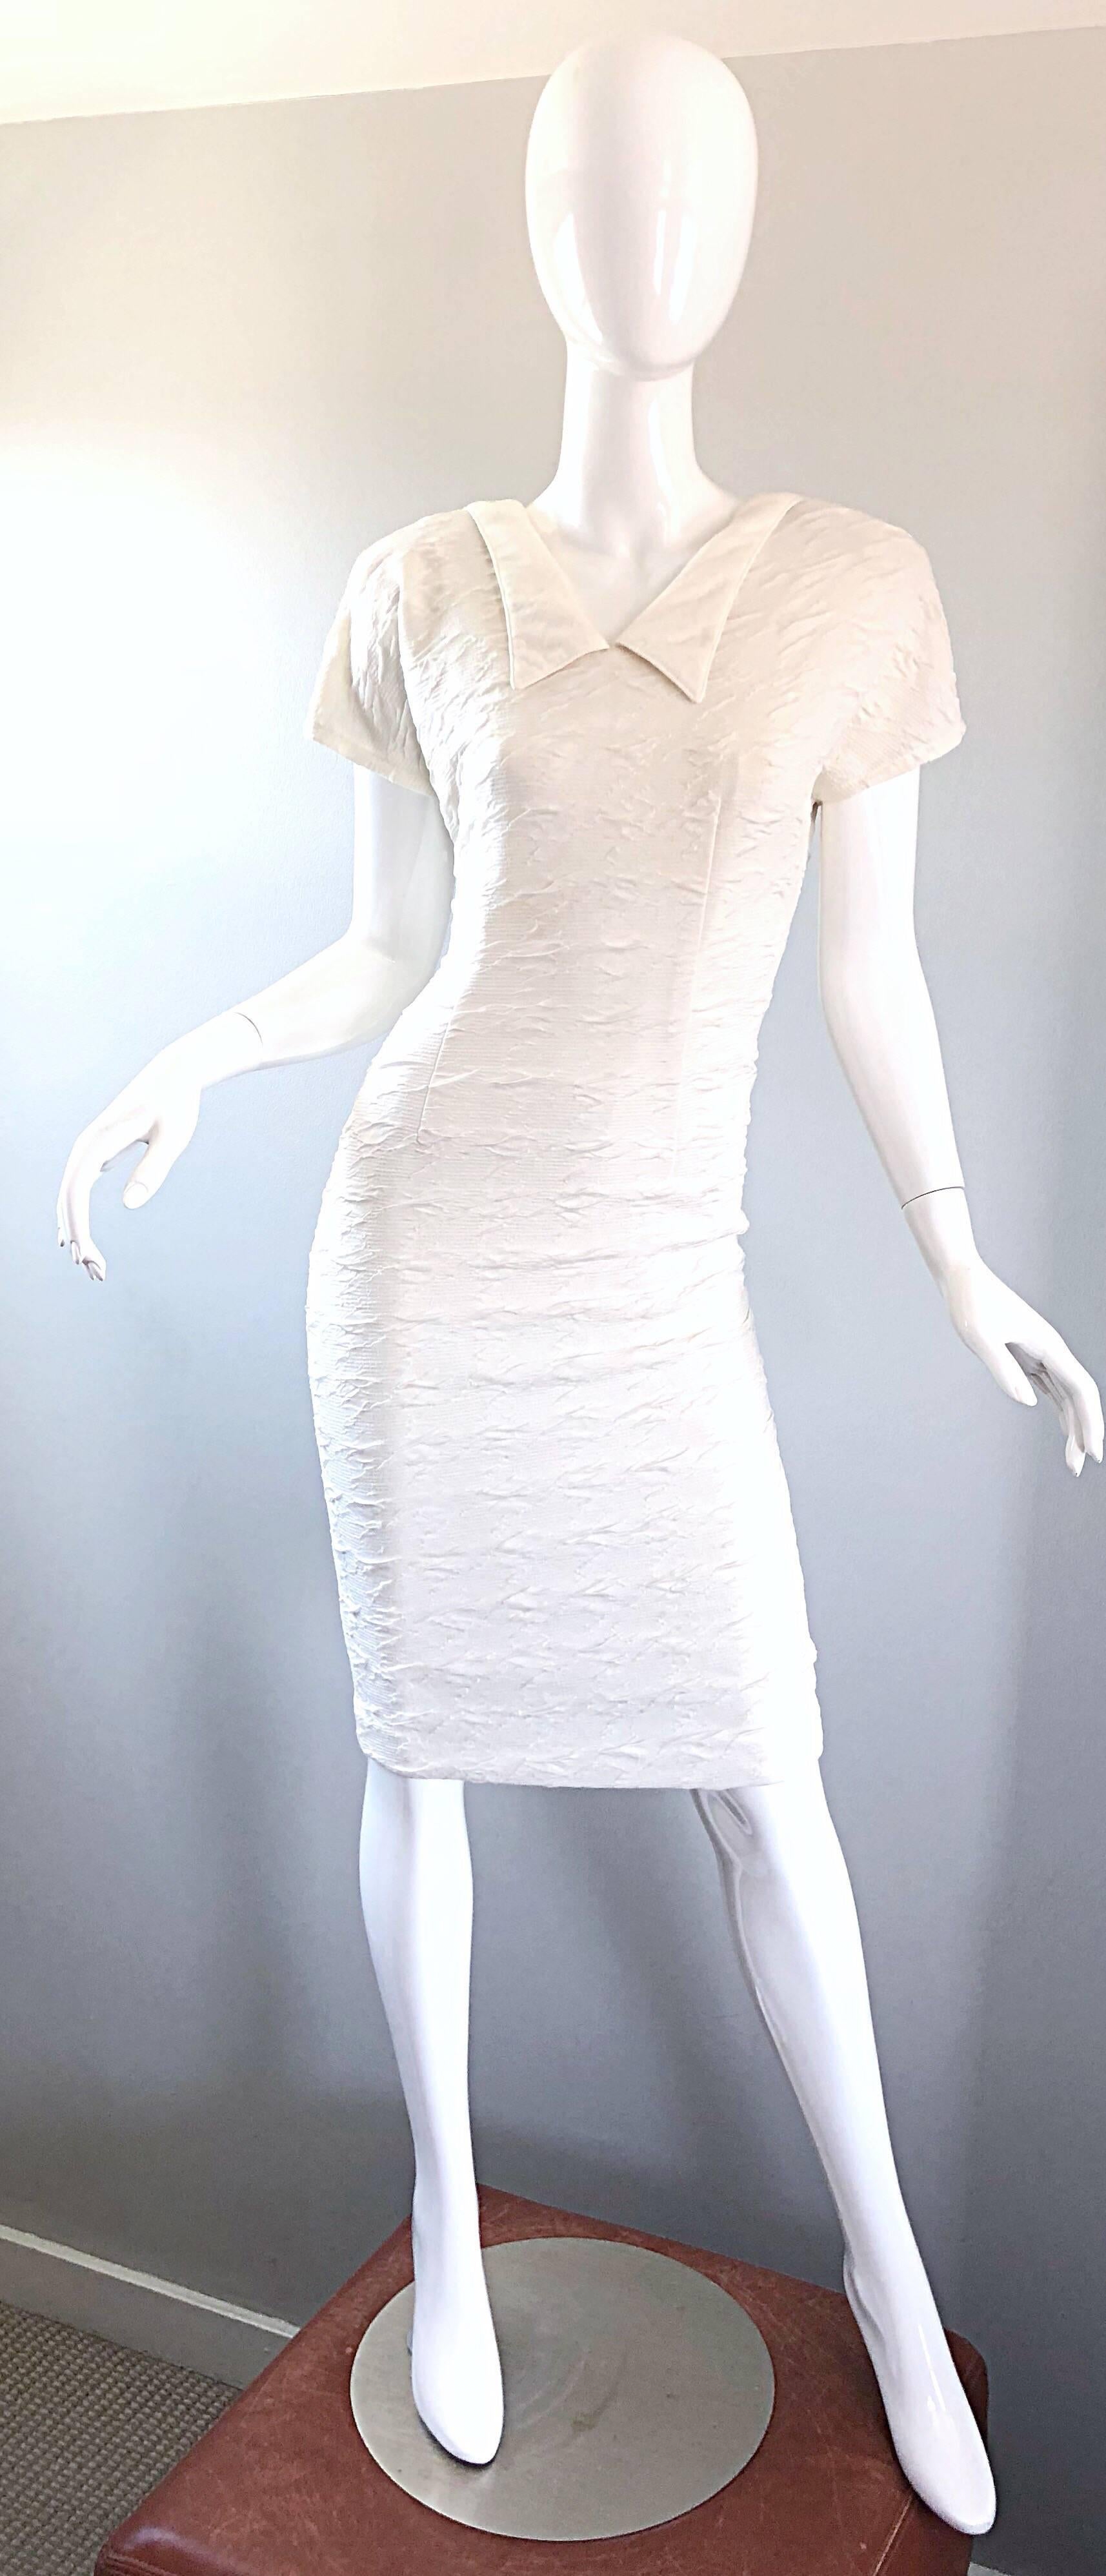 Sexy early 90s LA KUCCI white bodycon French dress! Features a soft textured rayon jersey that stretches to fit. Avant Garde style with a mock collar and strong shoulders (with shoulder pads). Hidden zipper up the back with hook-and-eye closure.